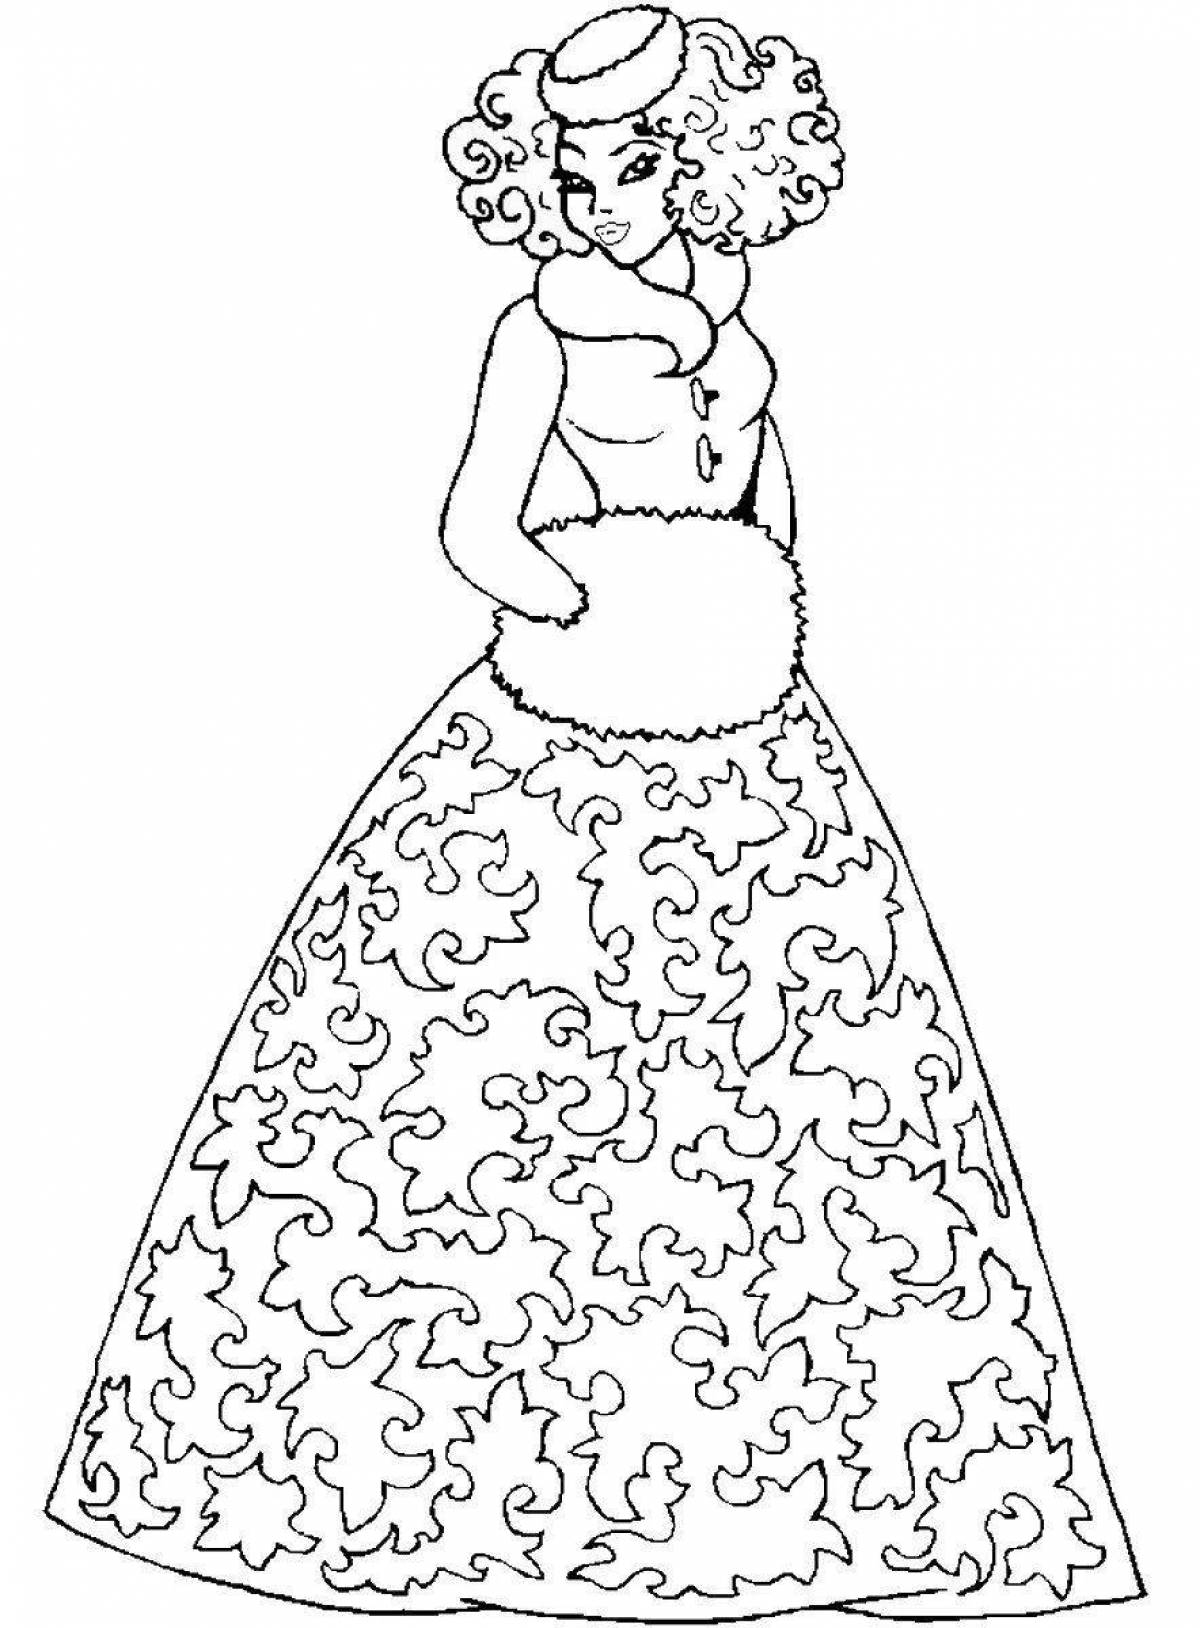 Showy dress for mom coloring